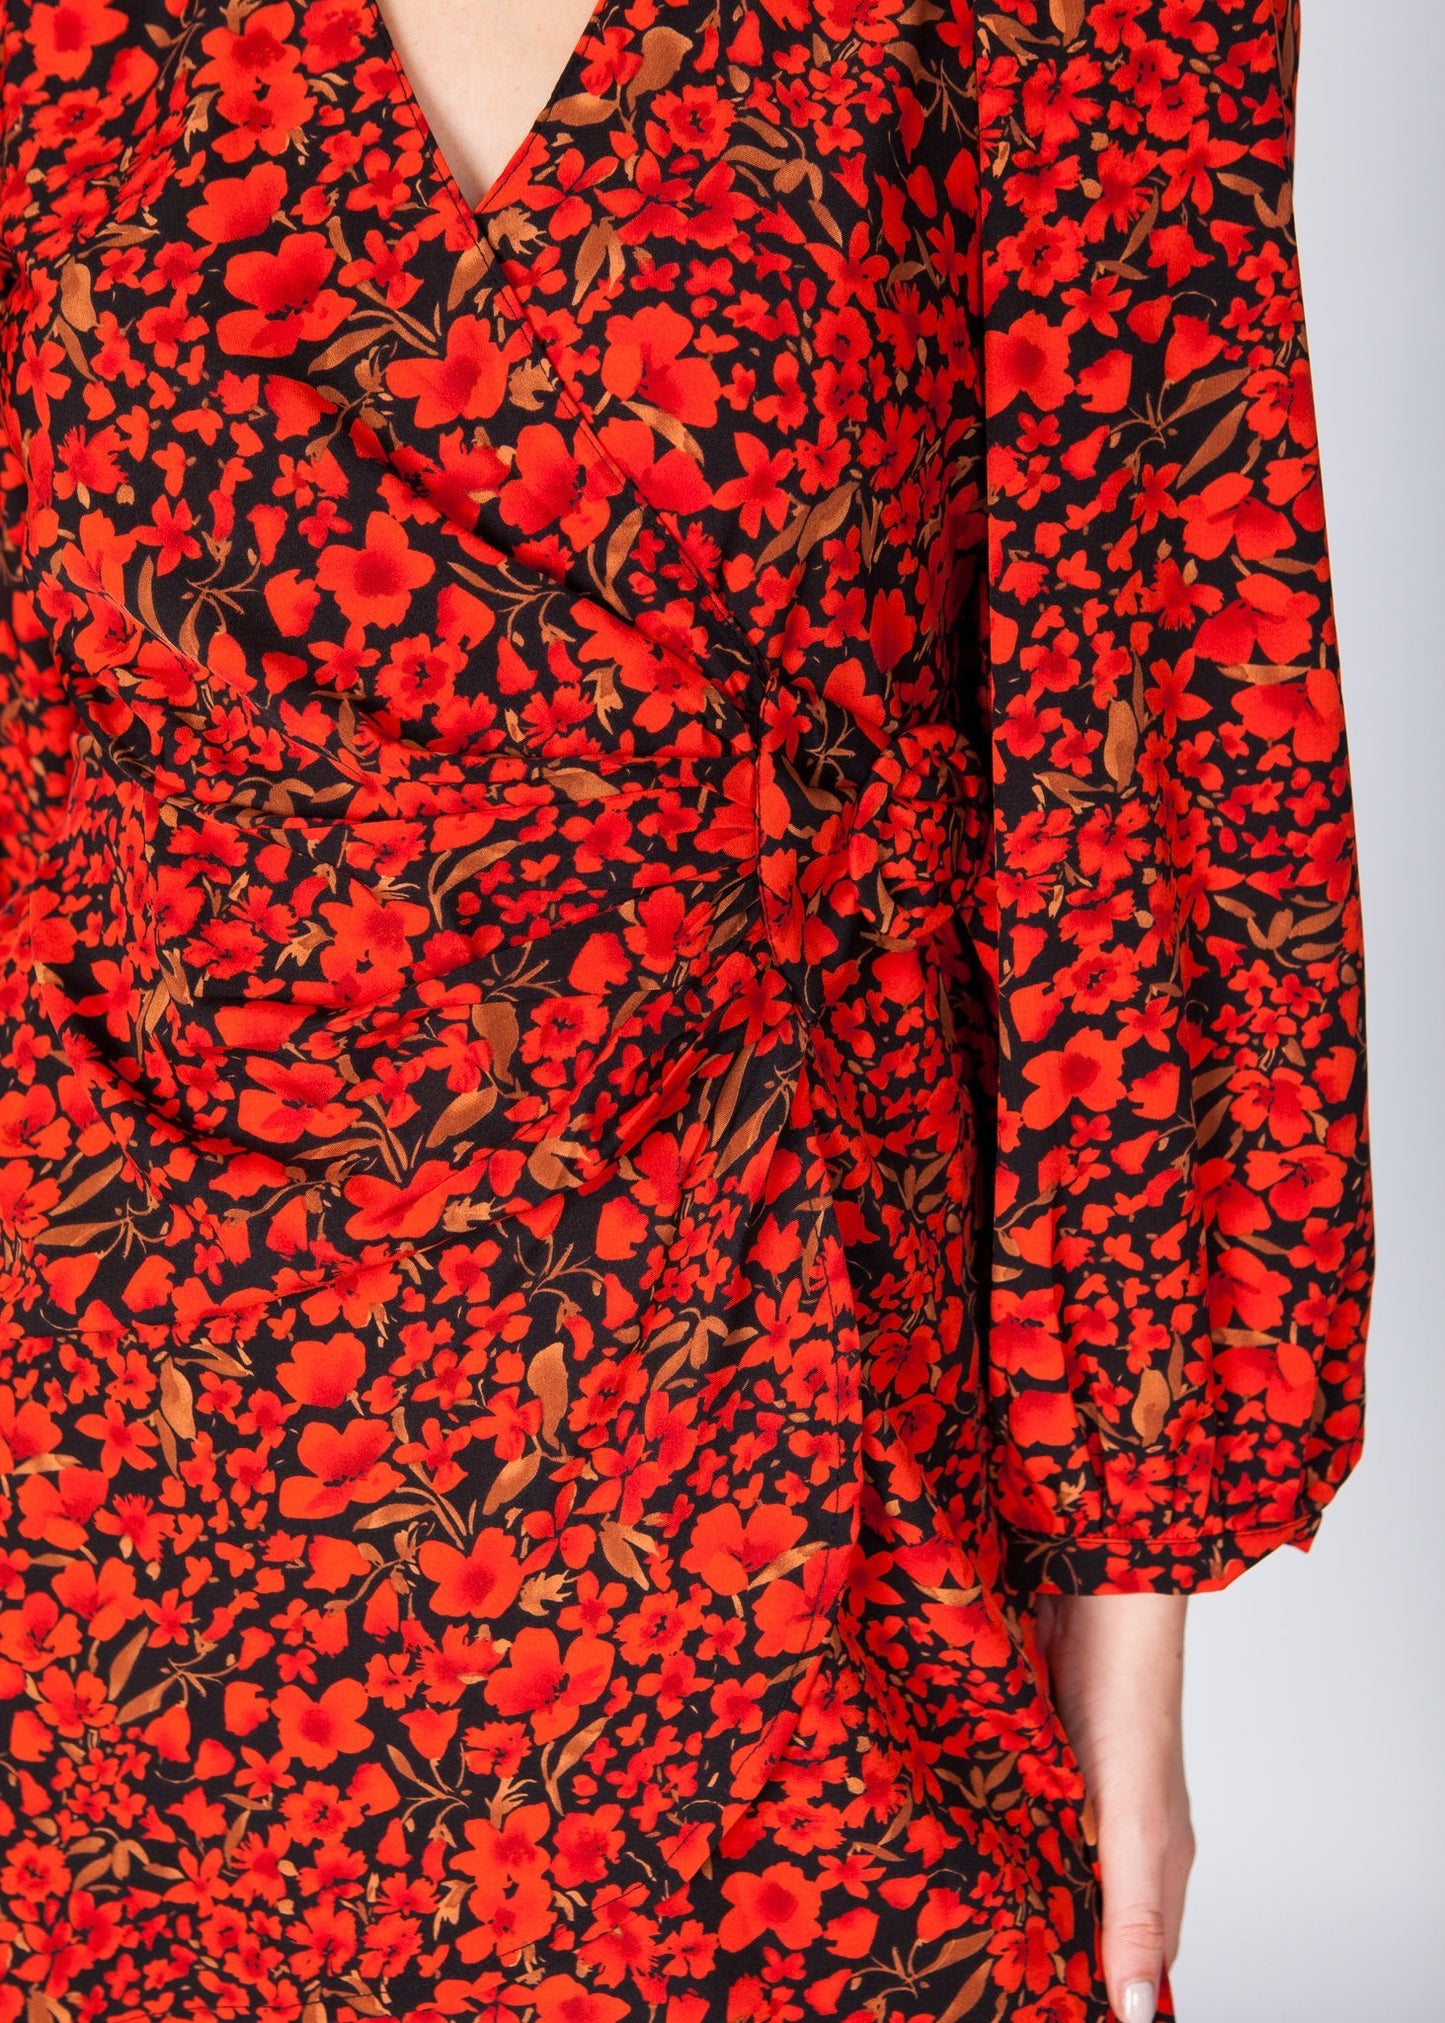 Kate Floral Wrap Top In Red - The Walk in Wardrobe